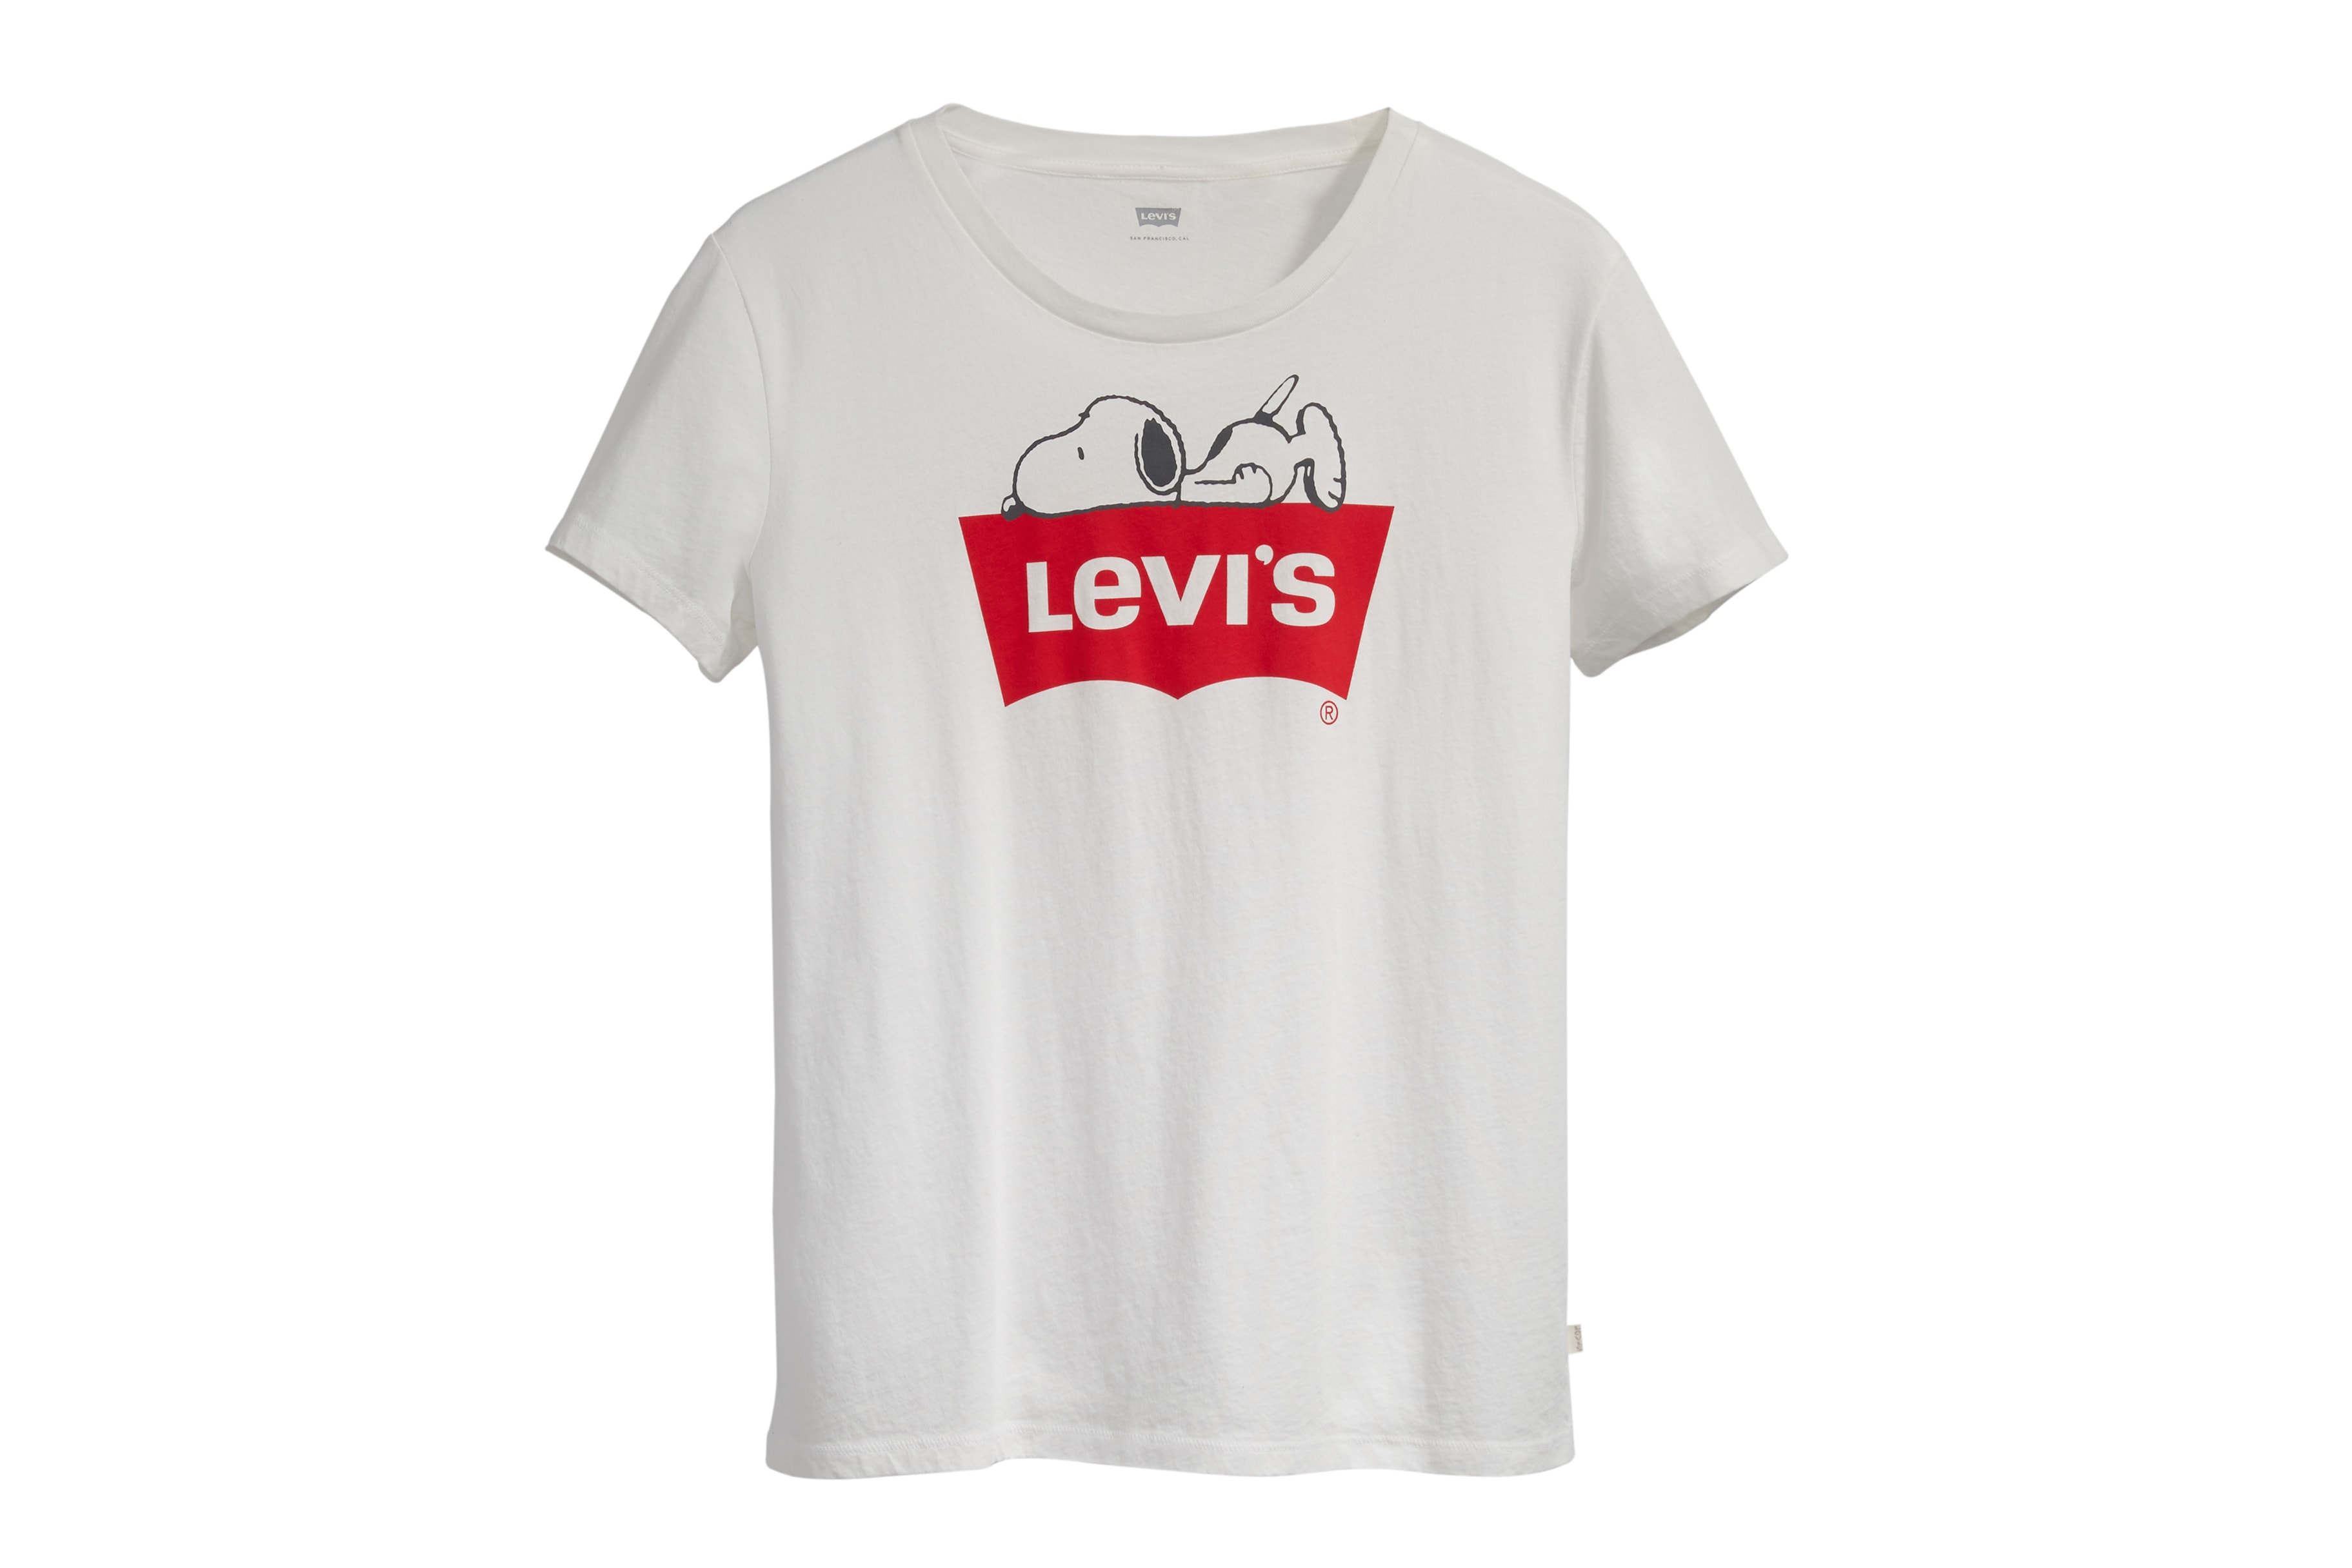 Levis Peanuts Snoopy Year of the Dog Collaboration Tshit